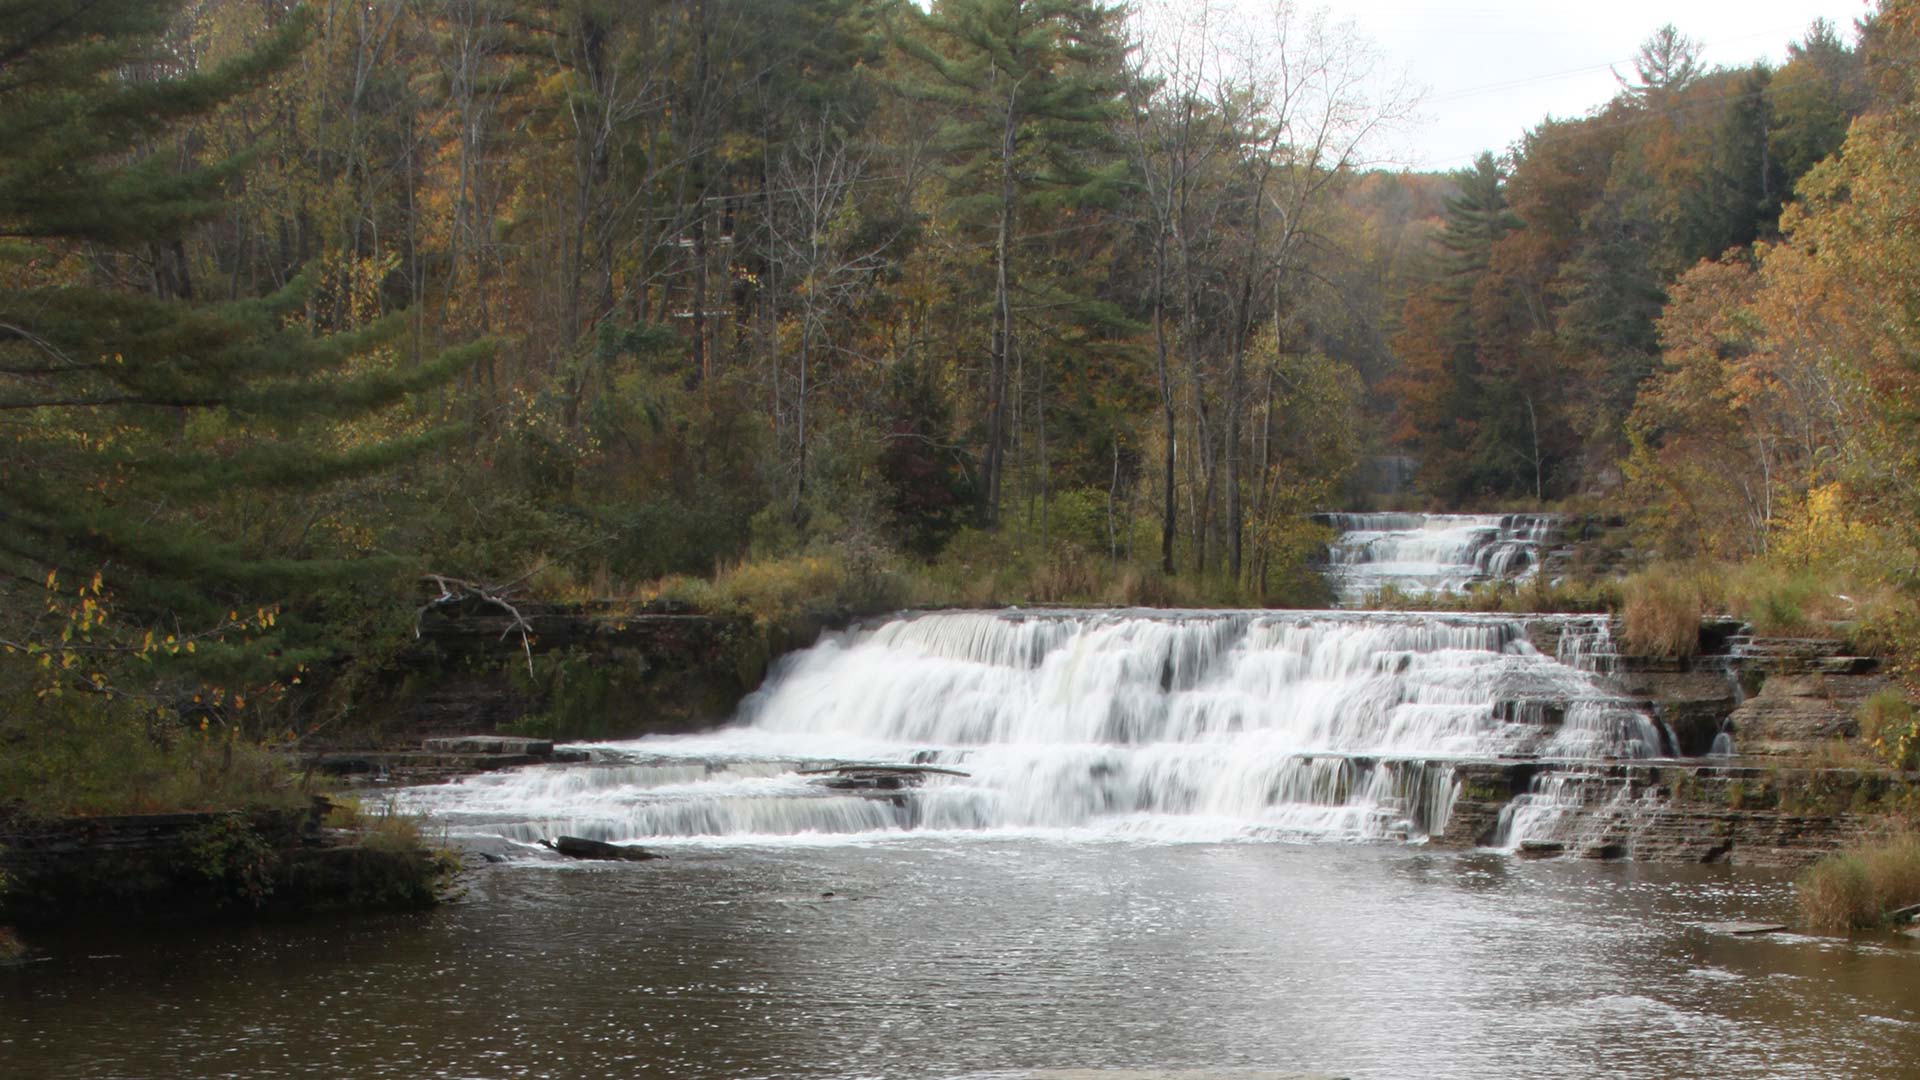 View of Wiscoy Falls, part of the Genesee River Valley in New York.